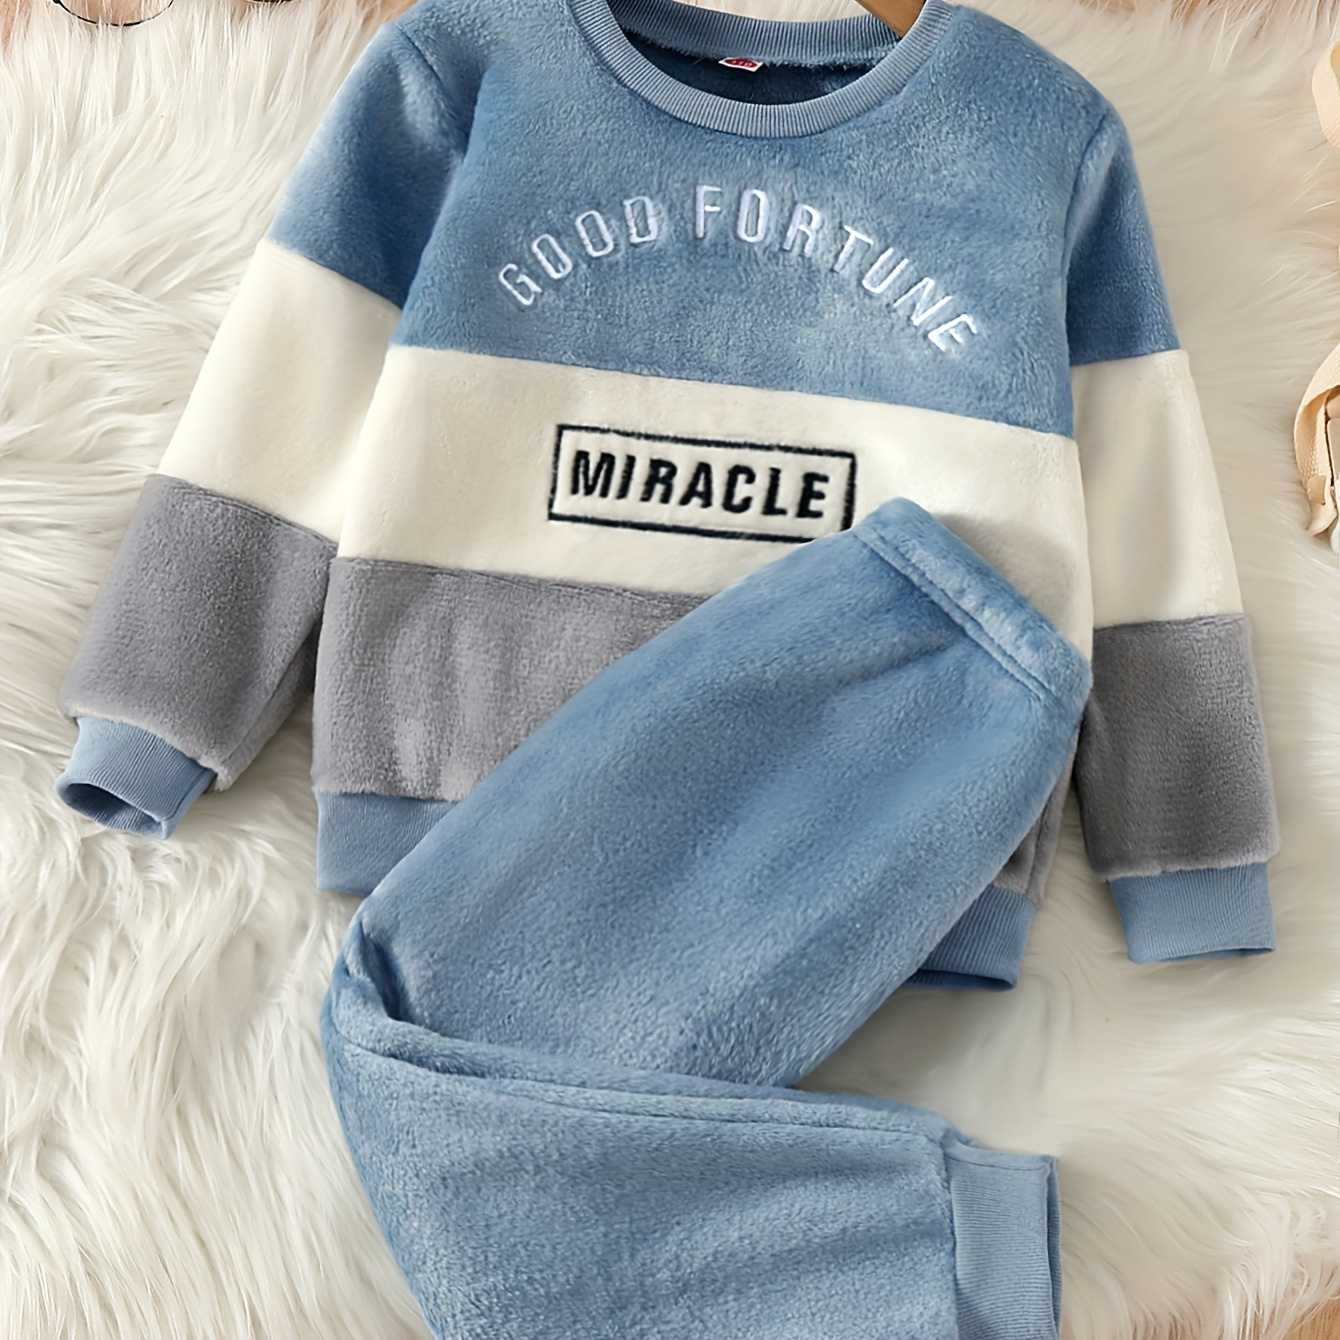 

2pcs Boy's "good Fortune Miracle" Embroidered Outfit, Fuzzy Fleece Sweatshirt & Pants Set, Casual Long Sleeve Top, Kid's Clothes For Spring Fall Winter, As Gift